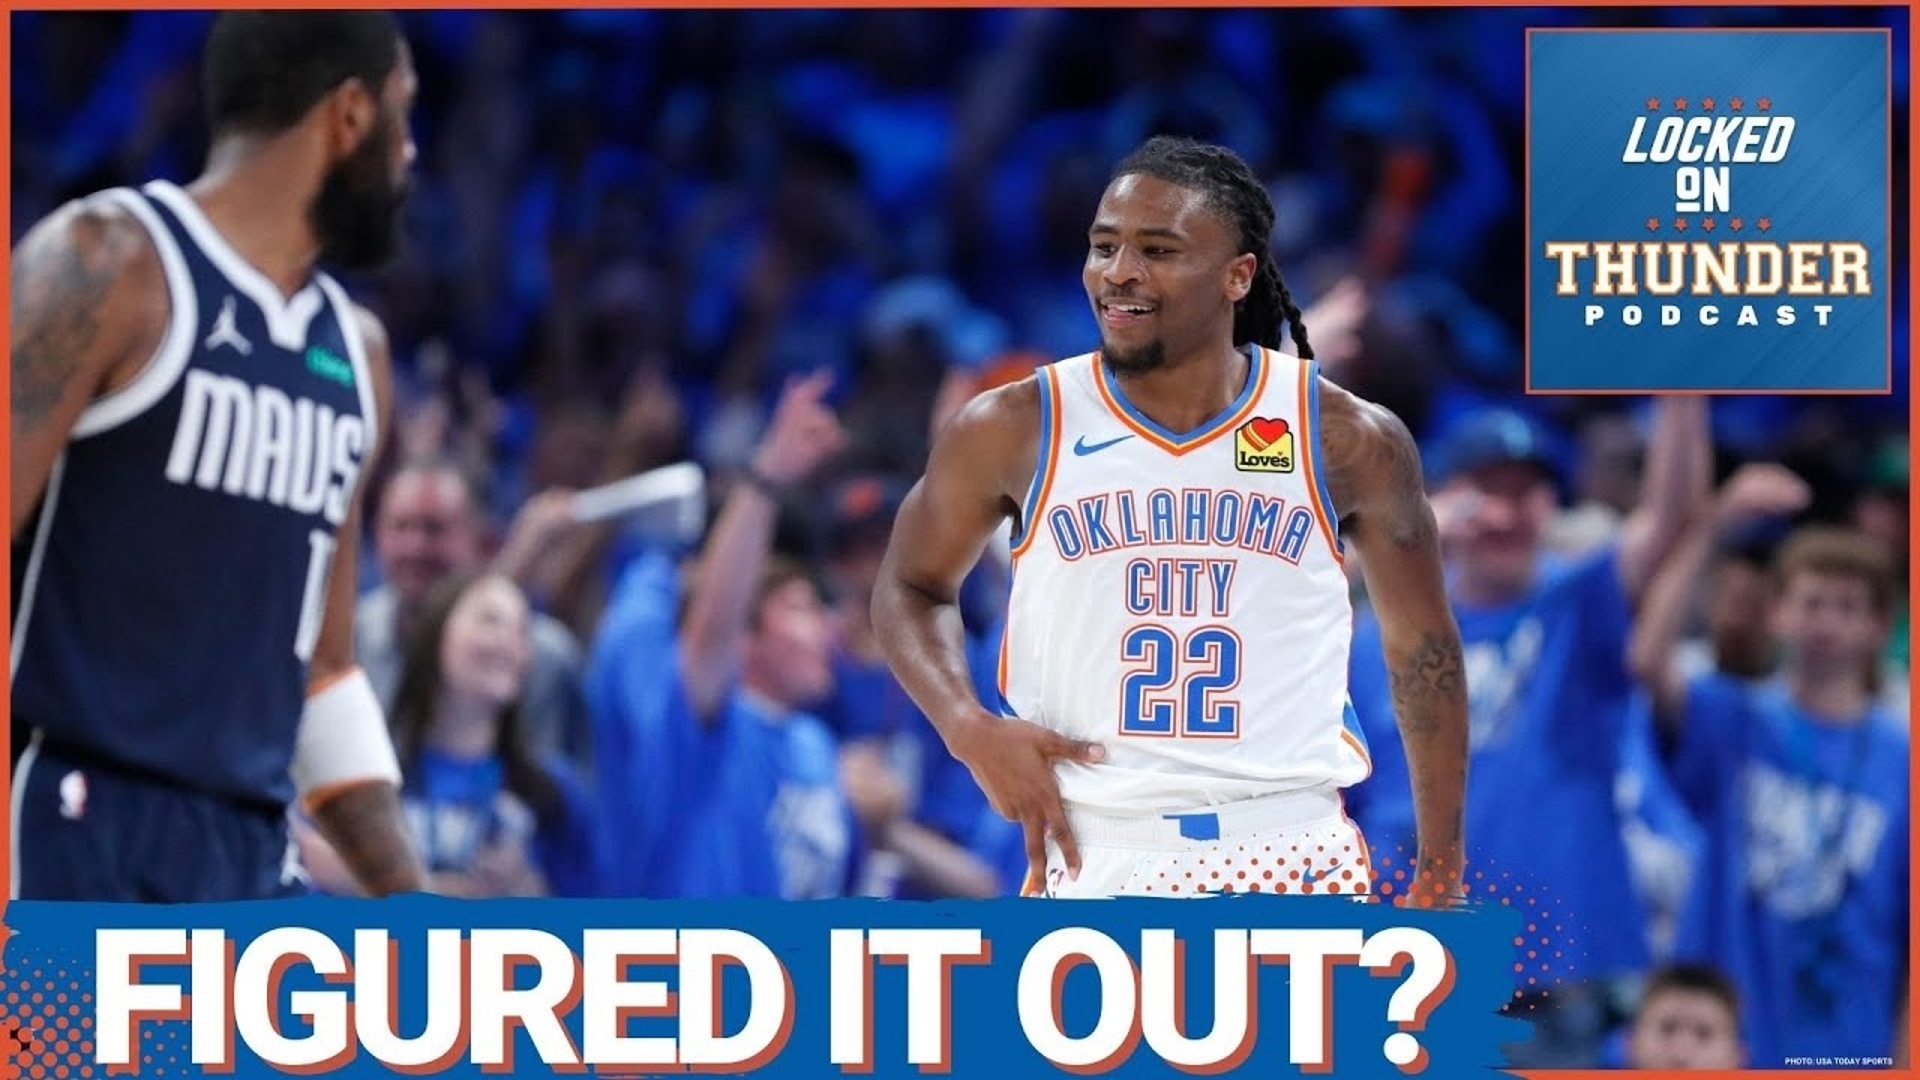 The Oklahoma City Thunder might have figured out how to win against the Dallas Mavericks in Gam3 4, what lessons can be brought to life in Game 5?